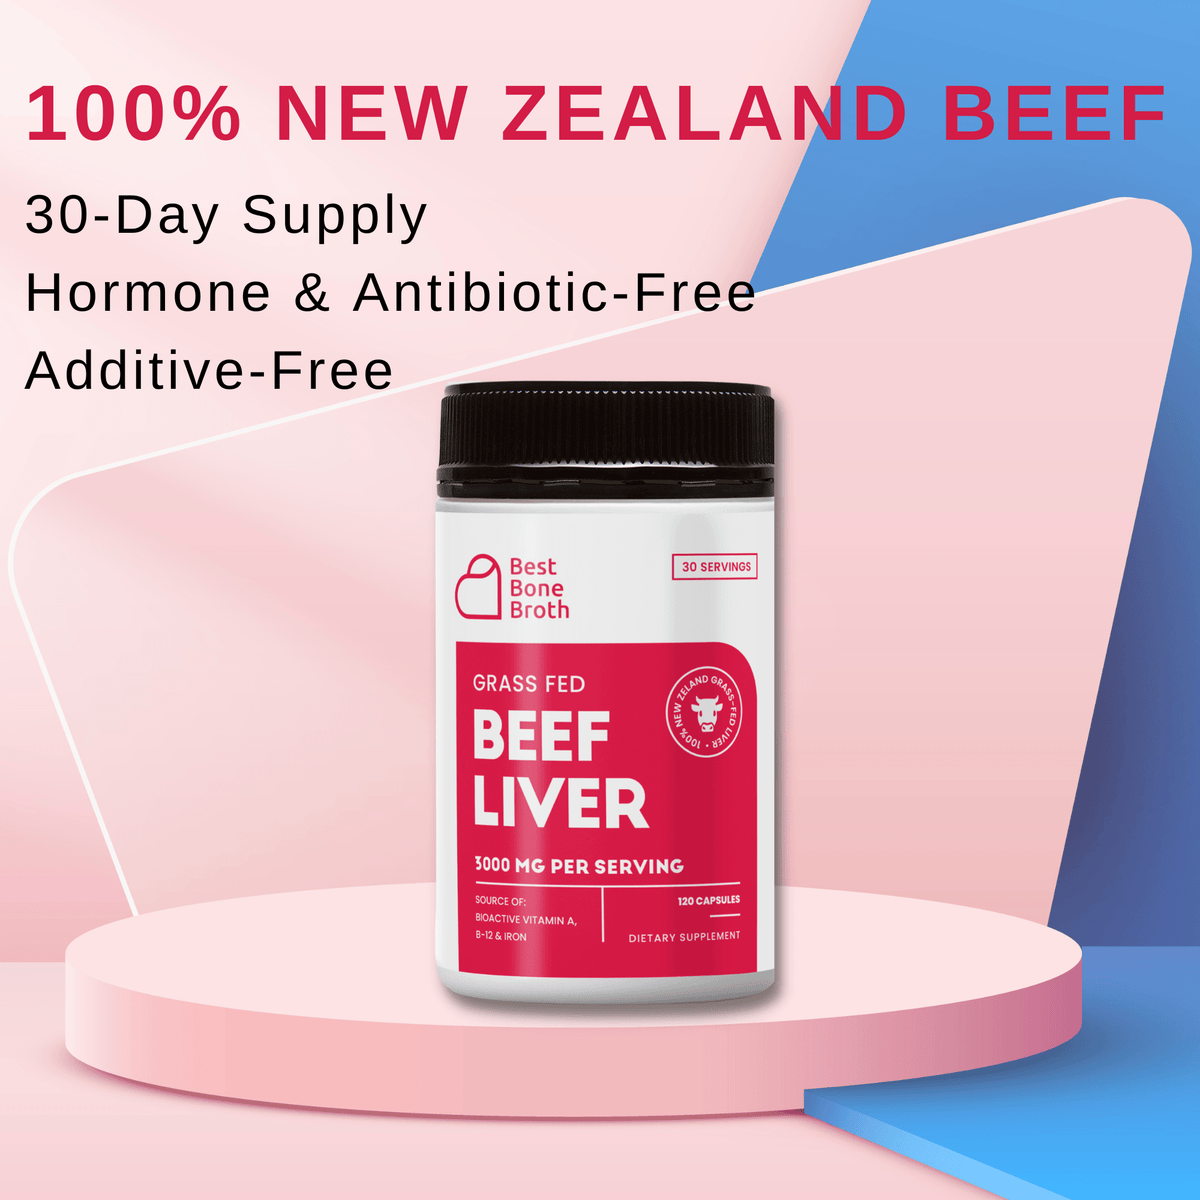 Best Bone Broth Supplement Beef Liver Capsules by Best Bone Broth (120 Capsules Per Bottle) - Freeze Dried Pure Grass-Fed Formula Beef Liver Supplements